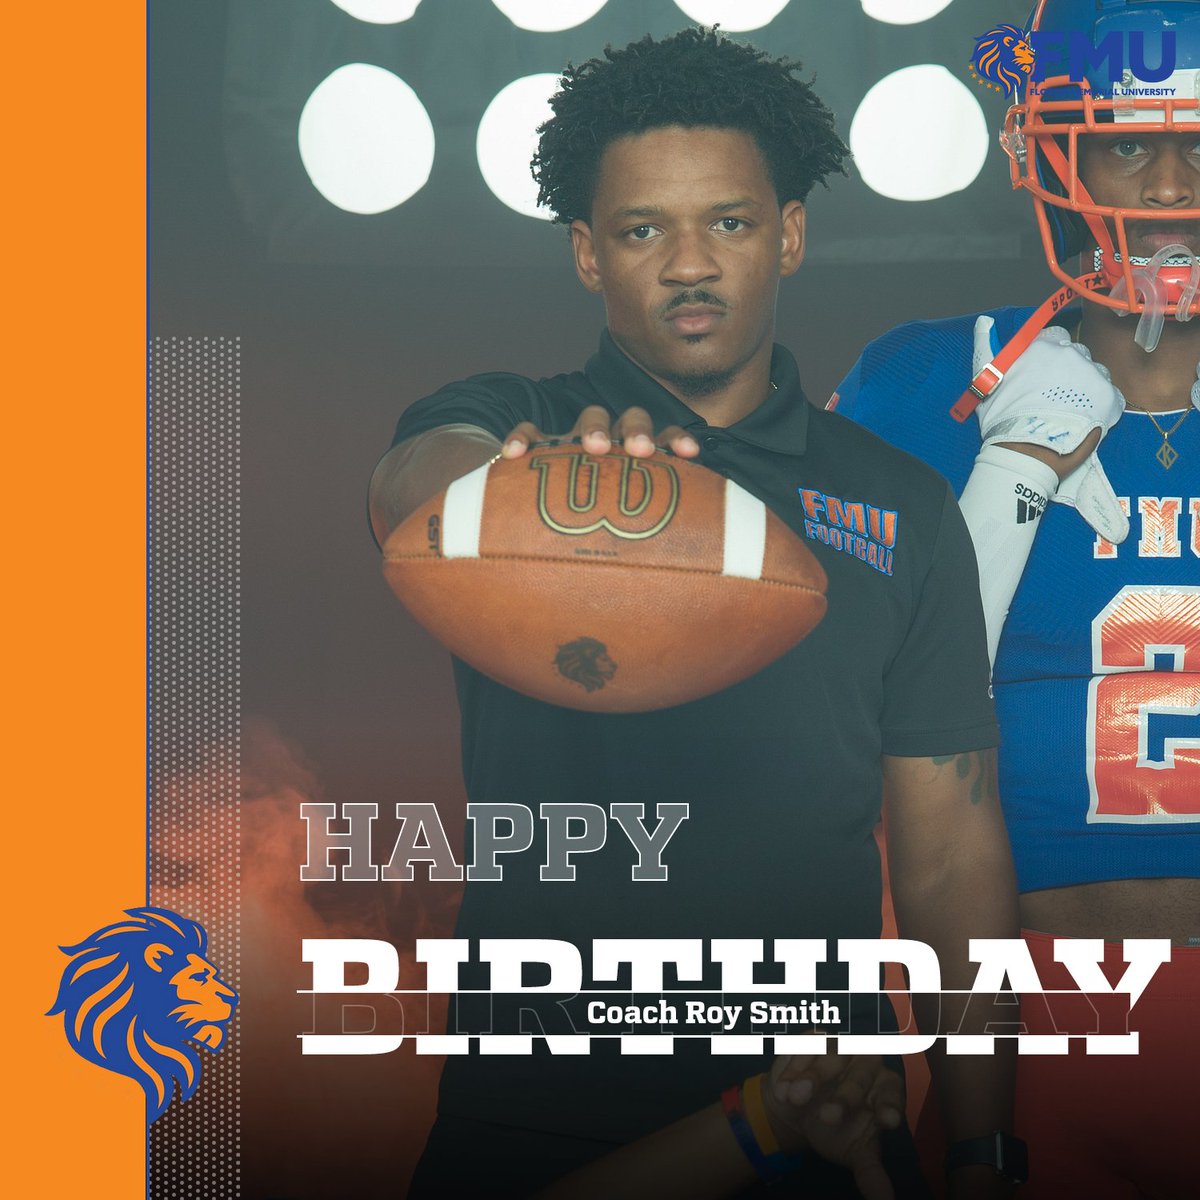 Happy birthday wide receivers coach @Chips_aRoy Smith of @FMULionsFB! 🦁🏈 #fmu #Lions #hbcu #FloridaMemorial #bday #UNC #RoySmith #widereceivers